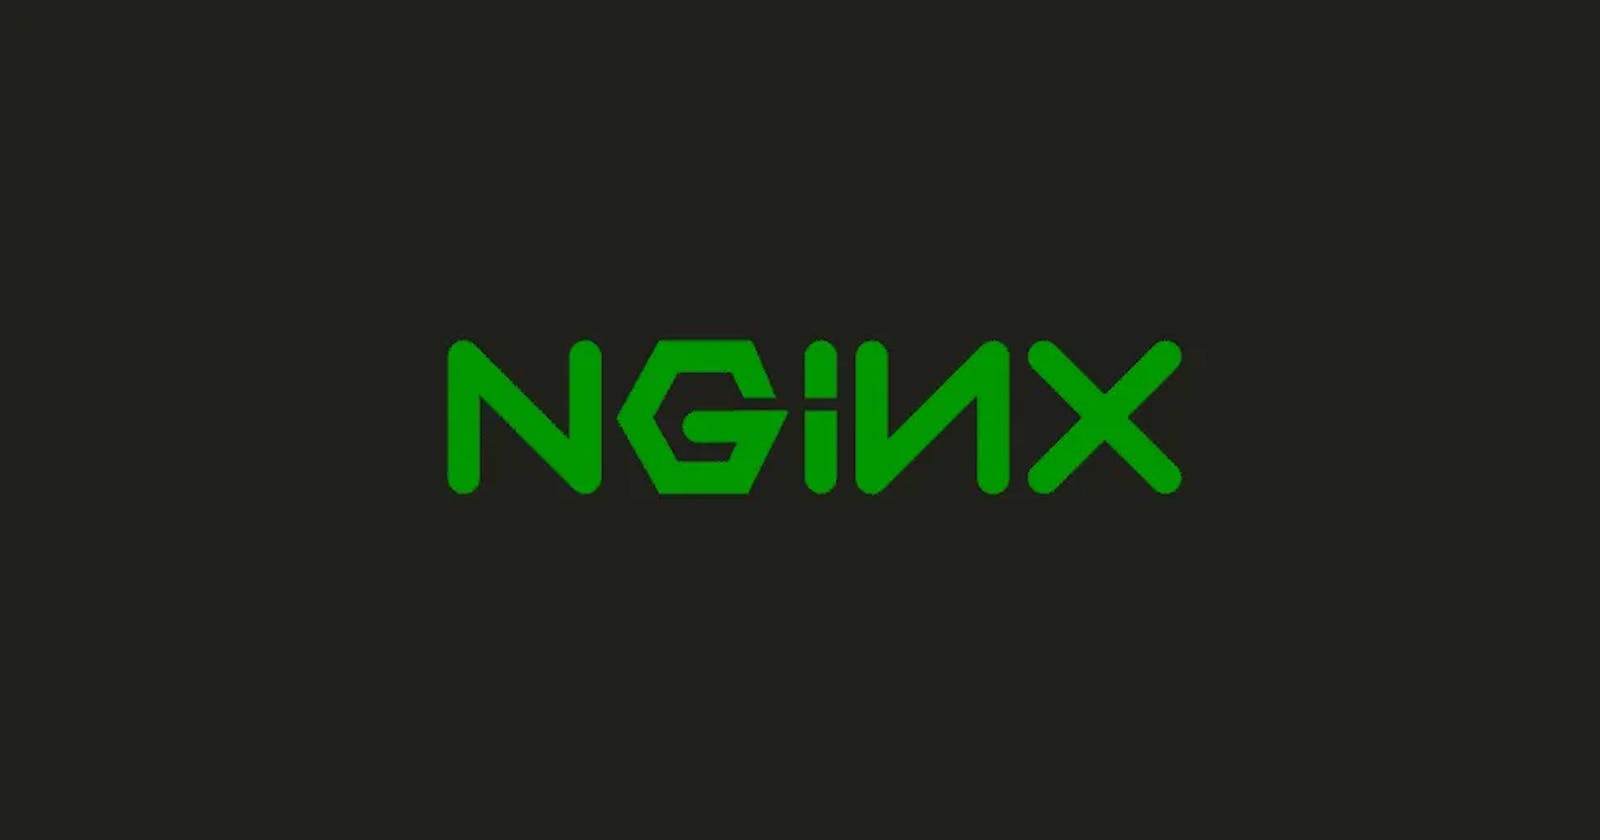 How to install Nginx on cPanel / WHM